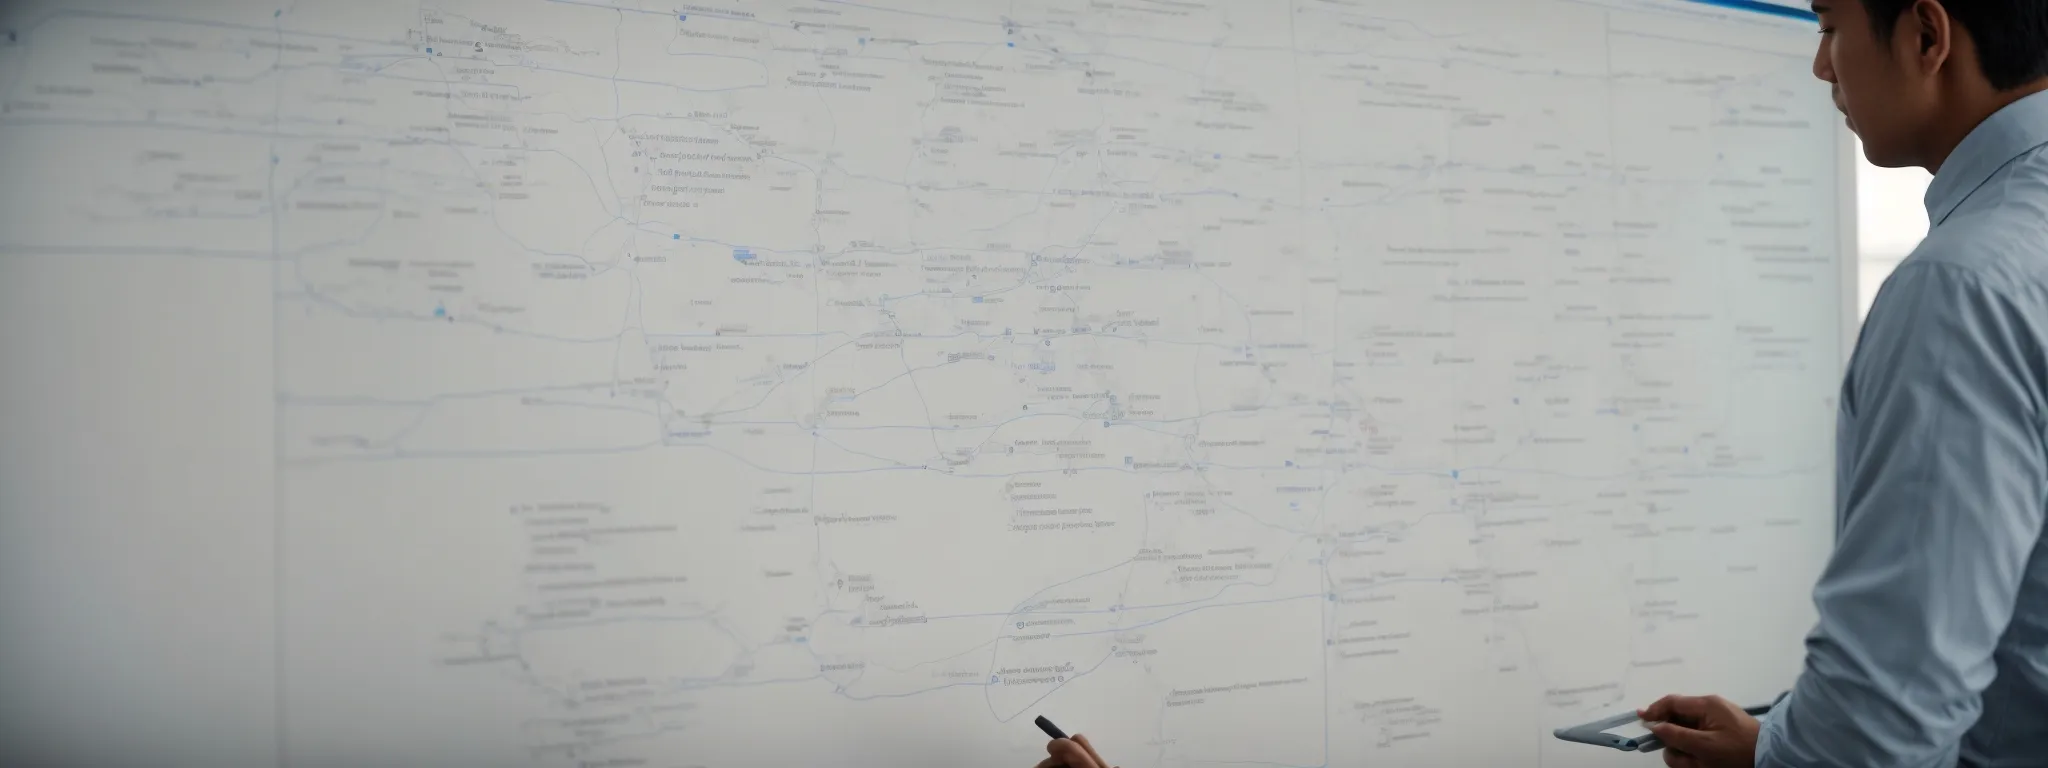 a web designer maps a streamlined website structure on a whiteboard, strategizing for optimal search engine discovery without compromising the user interface.